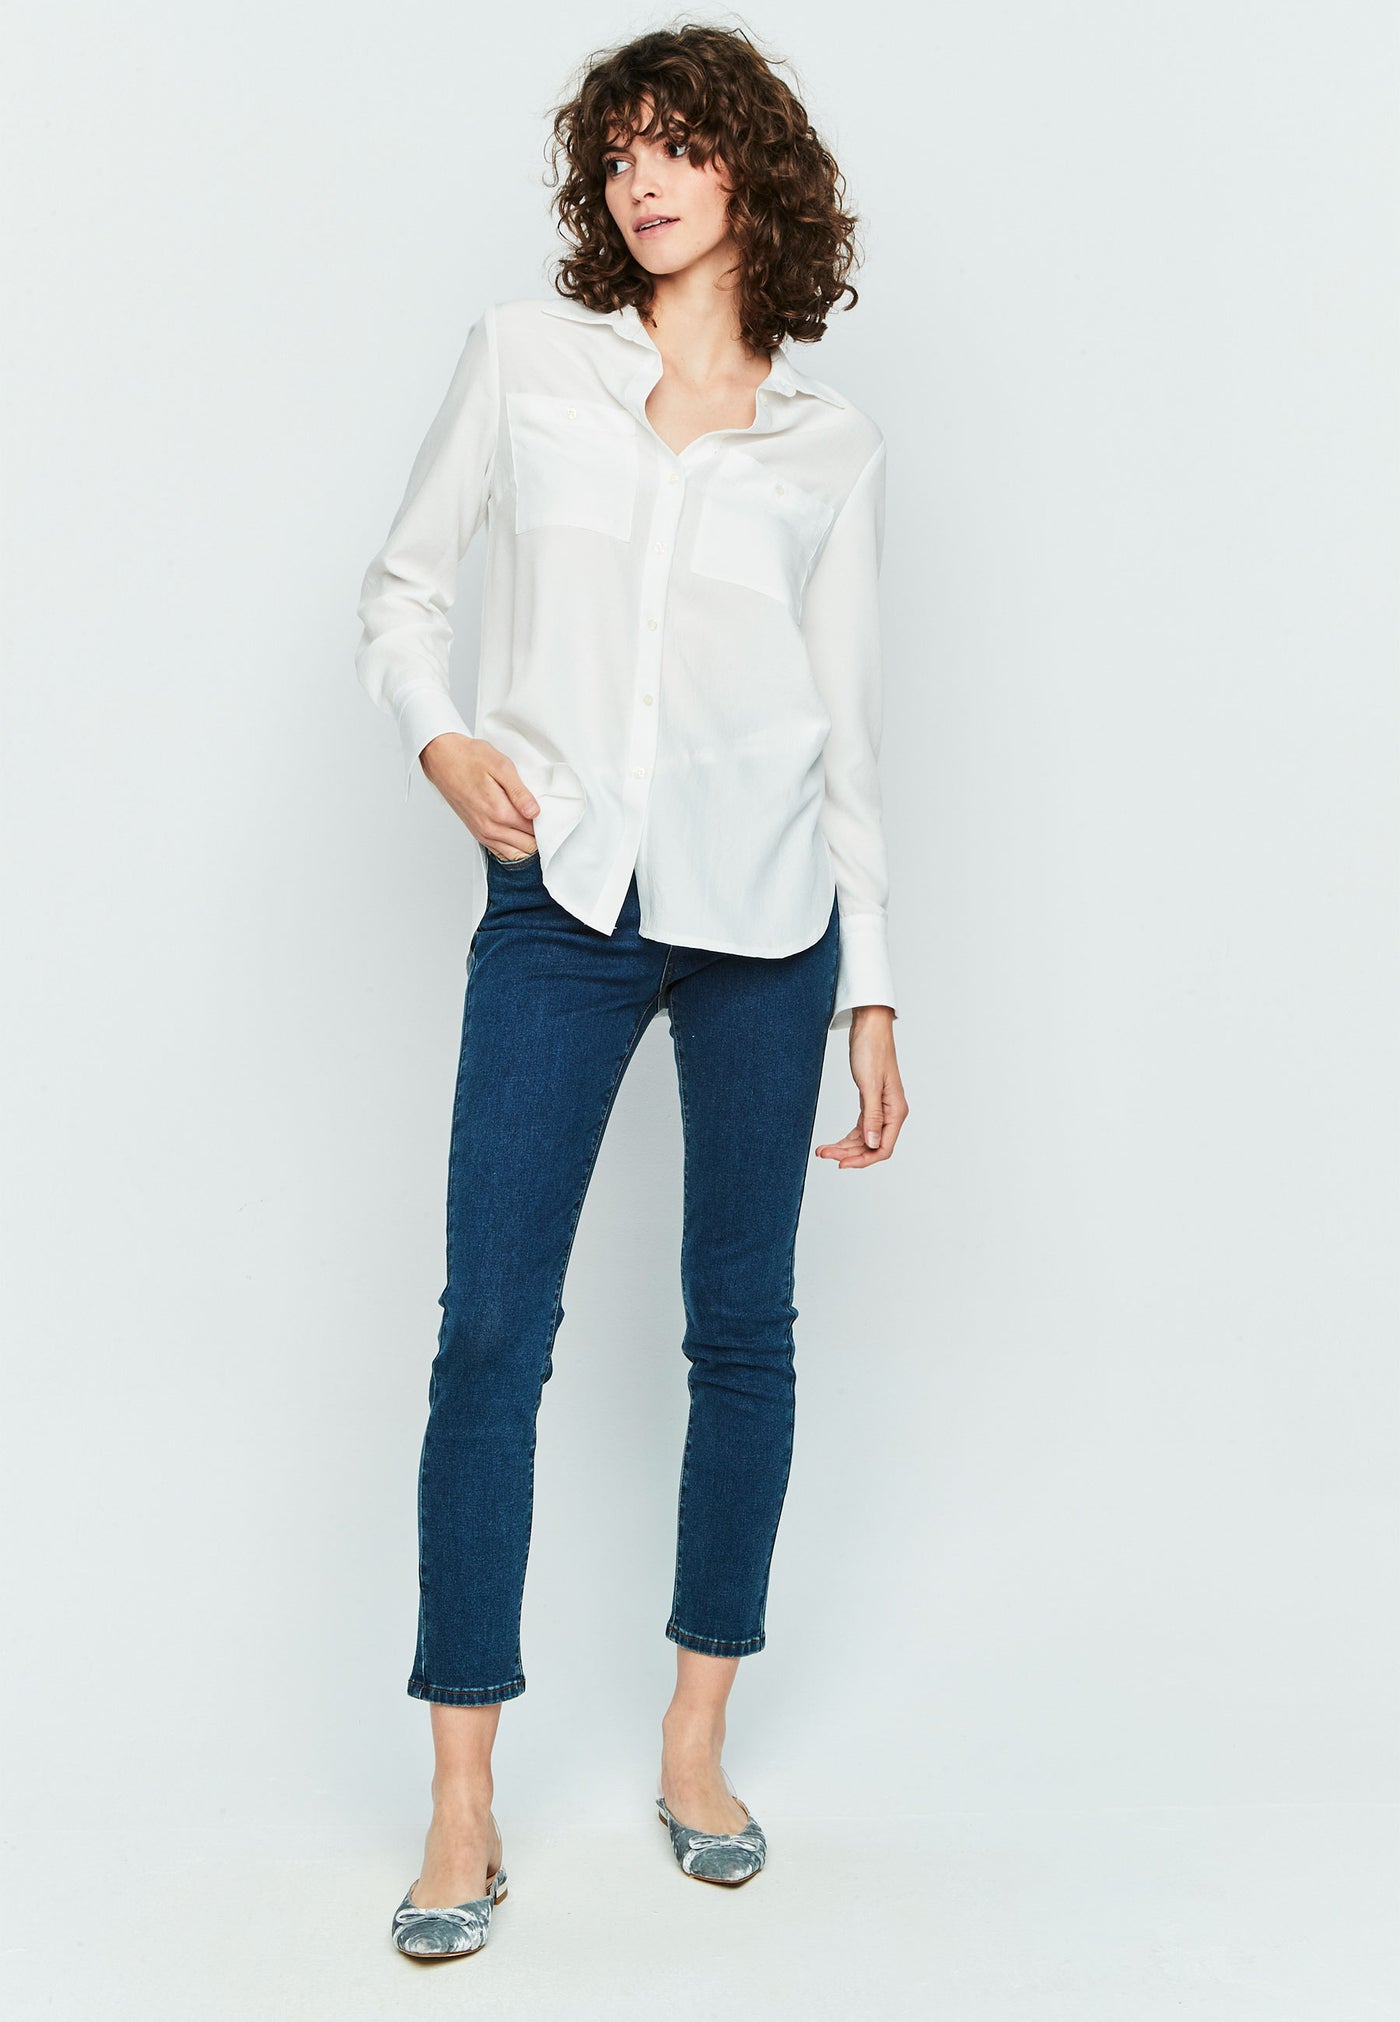 White Collared Shirt with Pocket Detail